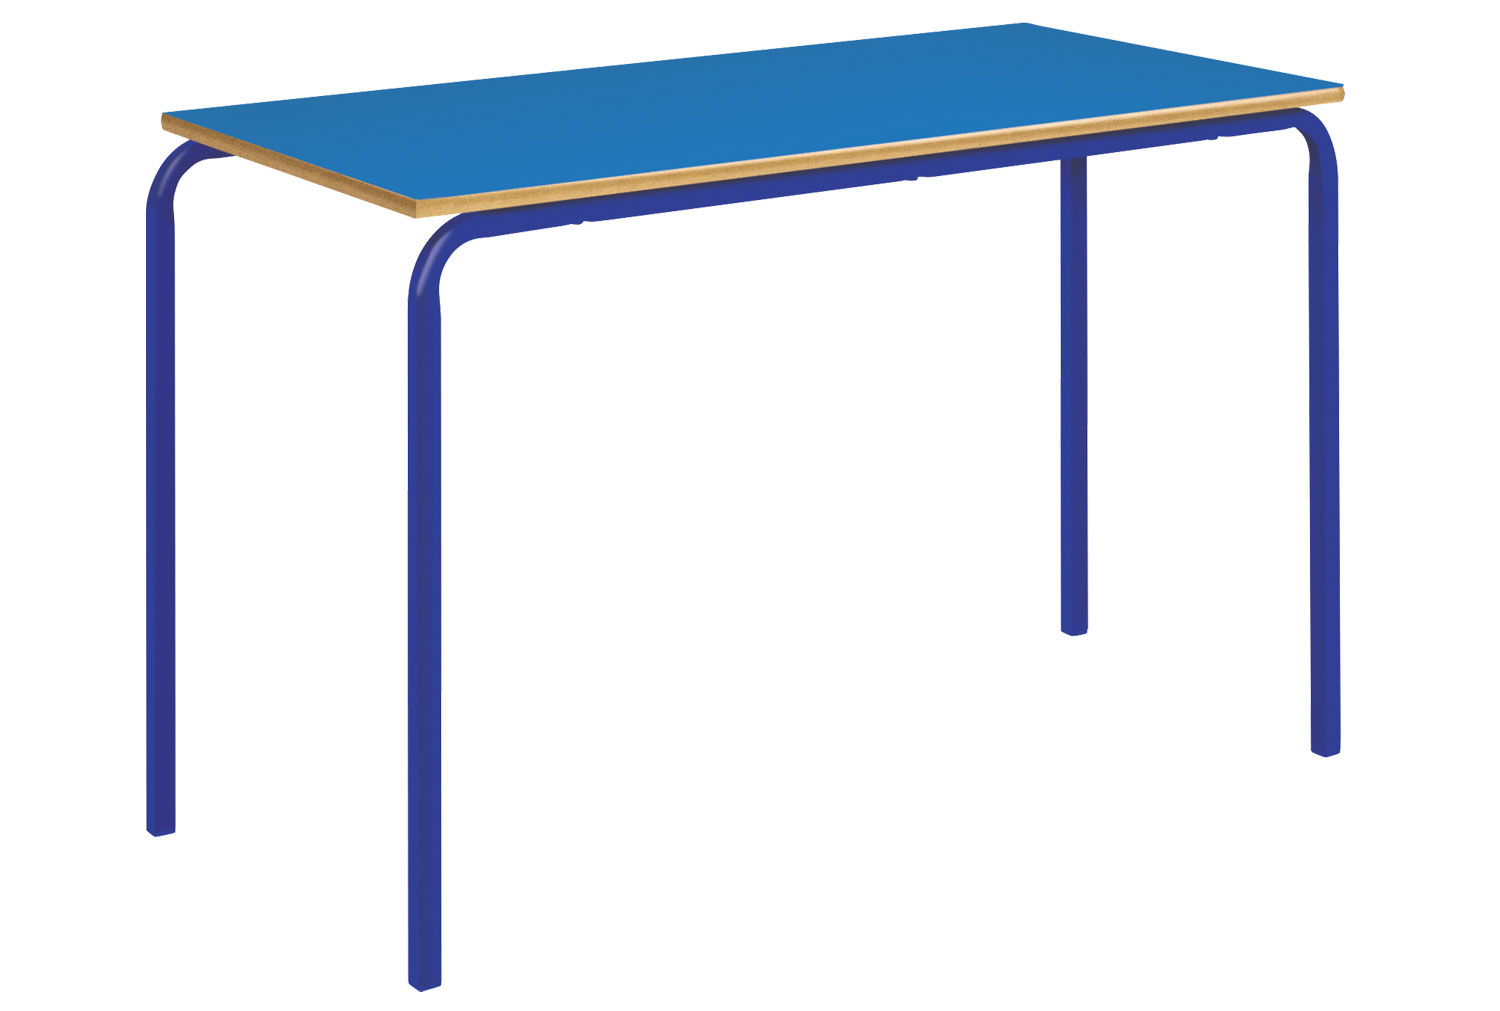 Qty 4 - Colour Edition Rectangular Crush Bent Classroom Tables, 14+ Years - 120wx60dx76h (cm), Green Frame, Red Top